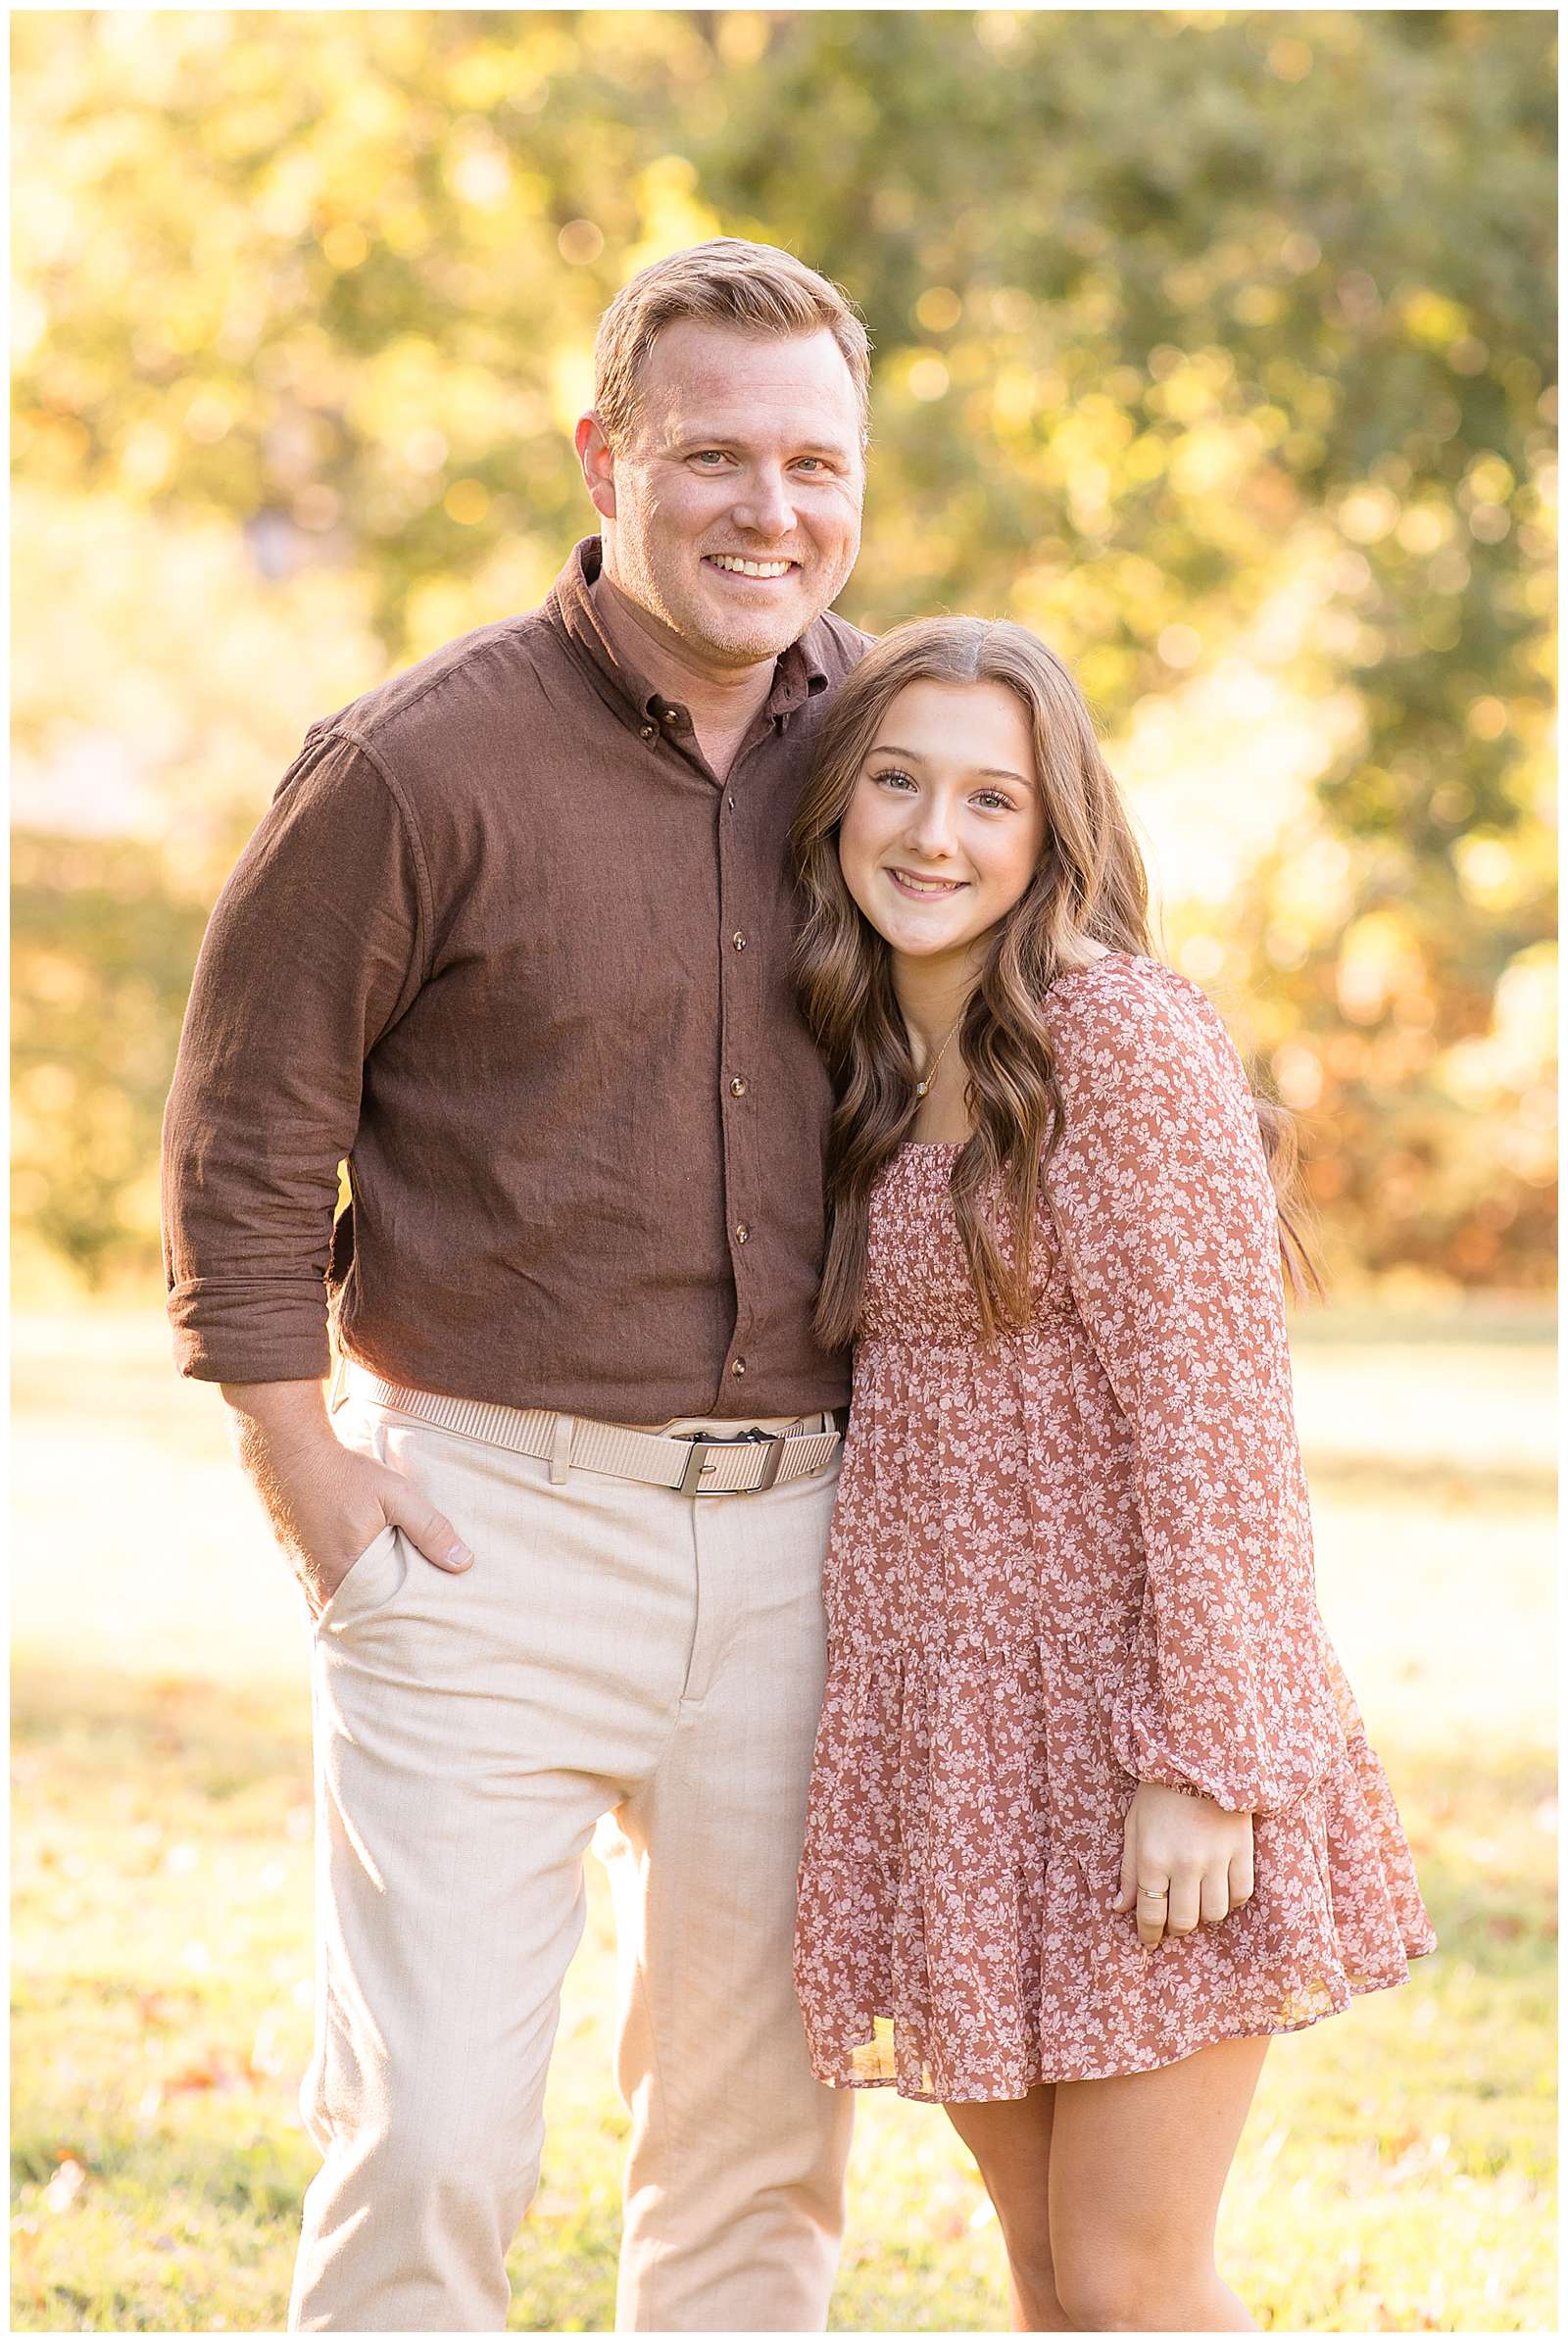 Family Photography Educator, Rebecca Rice captures an image of a Dad and his high school aged daughter during their fall family session.  Dad wears a brown, button down shirt and khaki pants and his daughter wears a dusty rose, long sleeve dress with small white flowers all over.